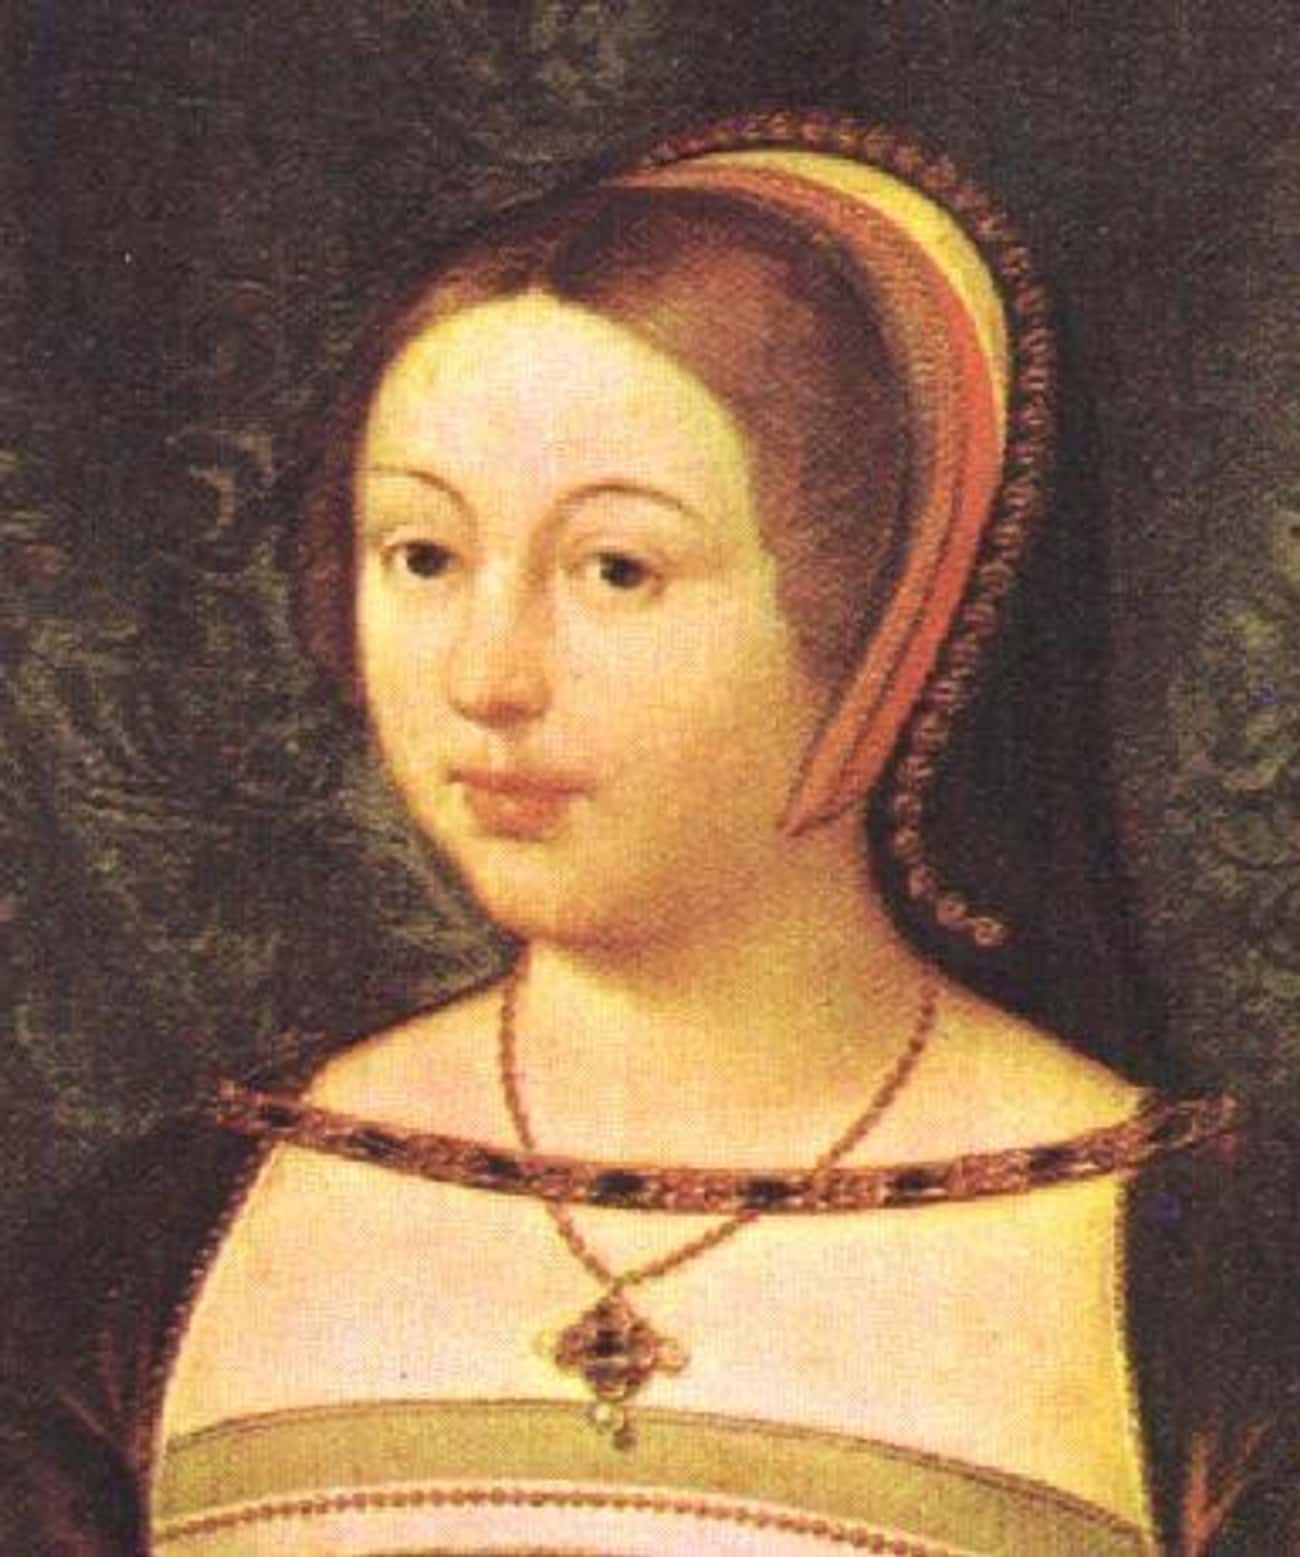 Margaret Tudor Showed A Rebellious Spirit Against Both Her Brother, Henry VIII, And The Scottish Lords